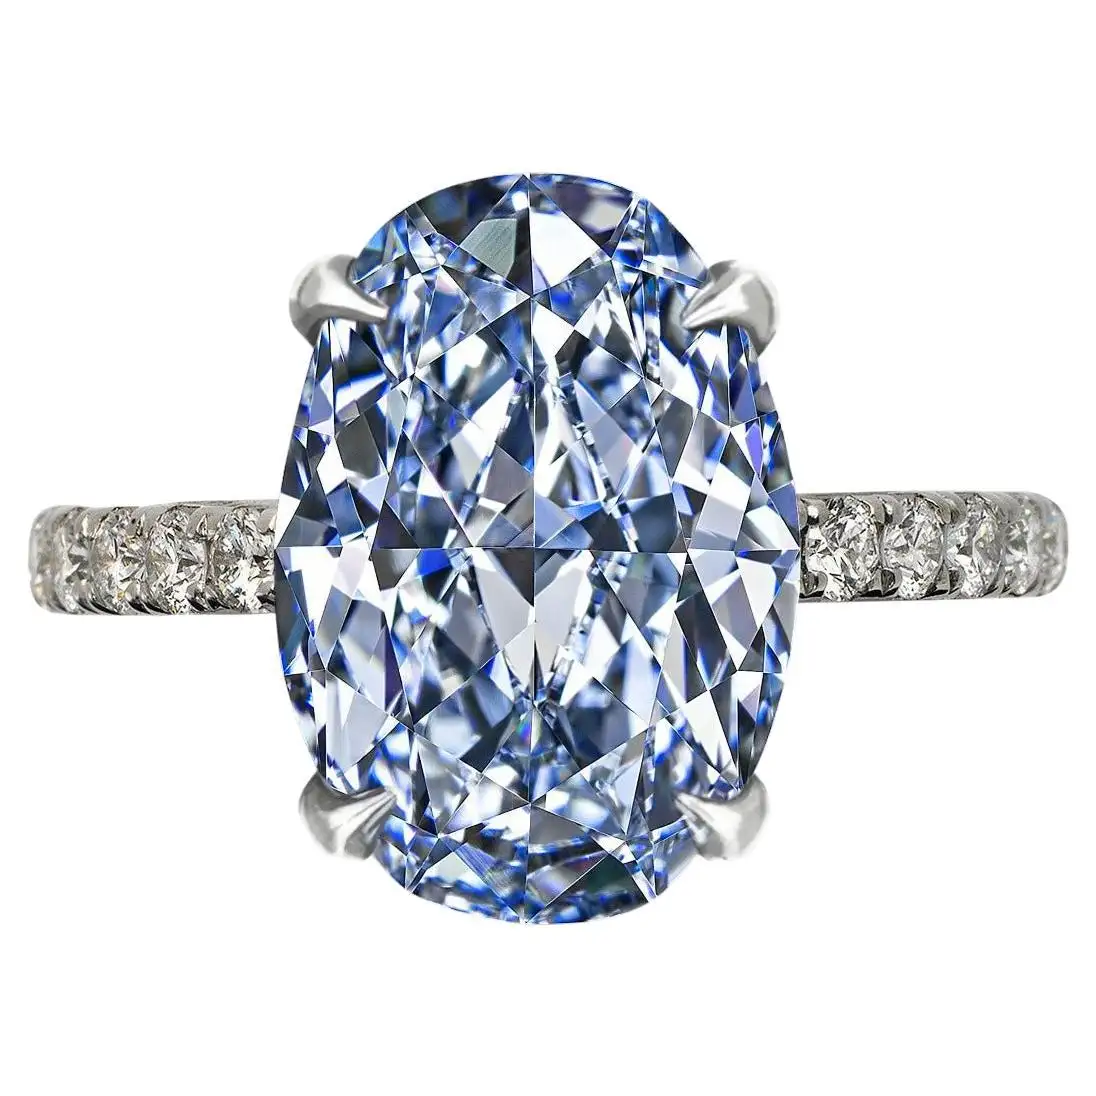 Exceptional GIA Certified 2 Carat Fanc